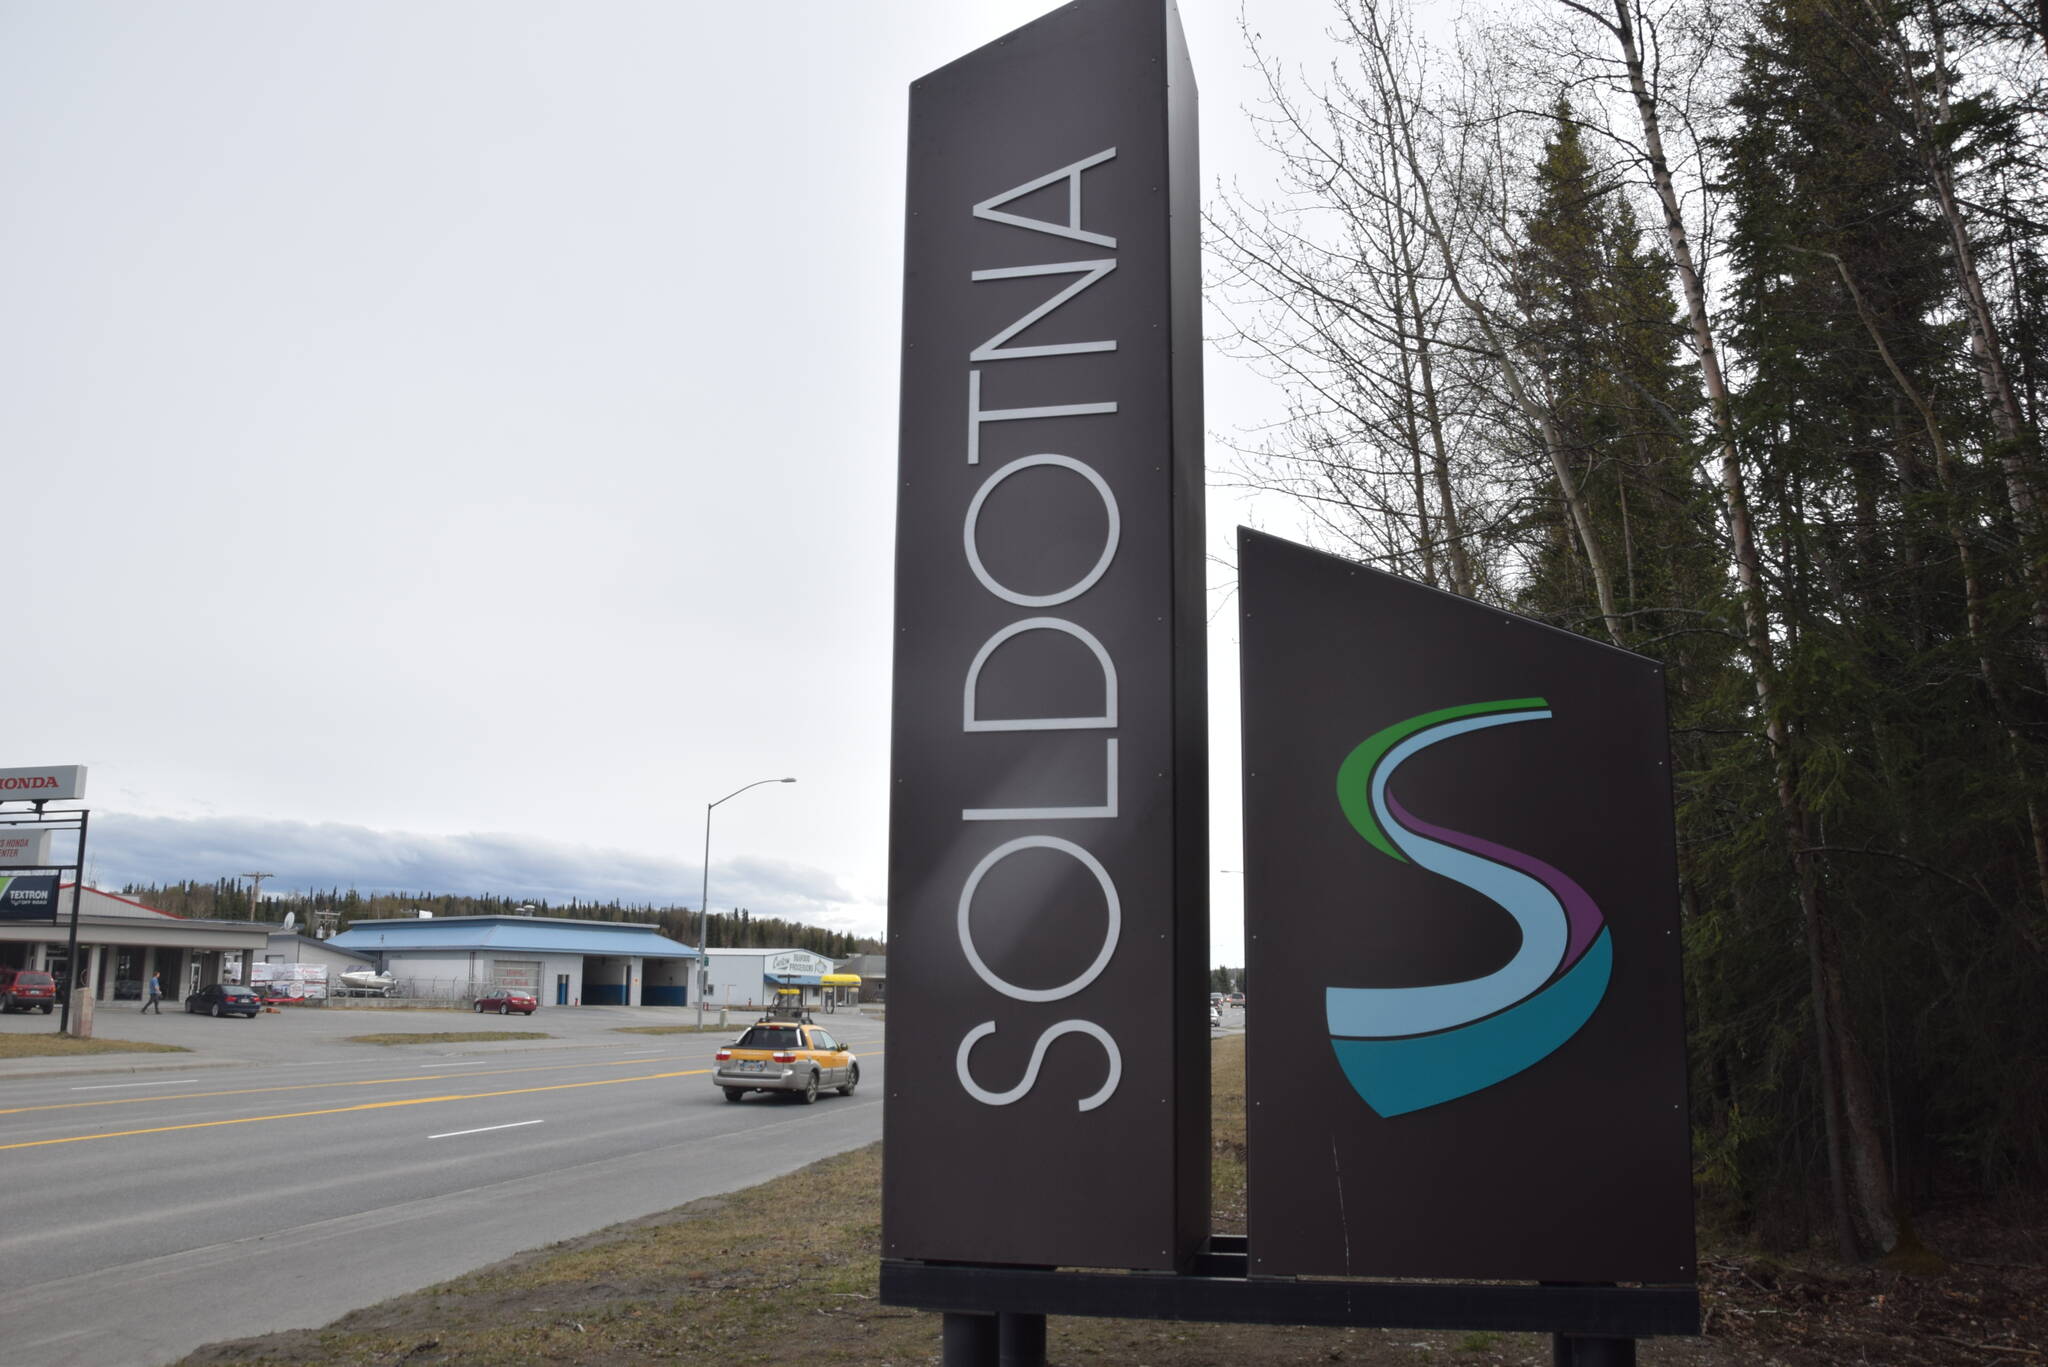 A sign welcomes people to the City of Soldotna on May 1, 2019, in Soldotna, Alaska. (Peninsula Clarion file)